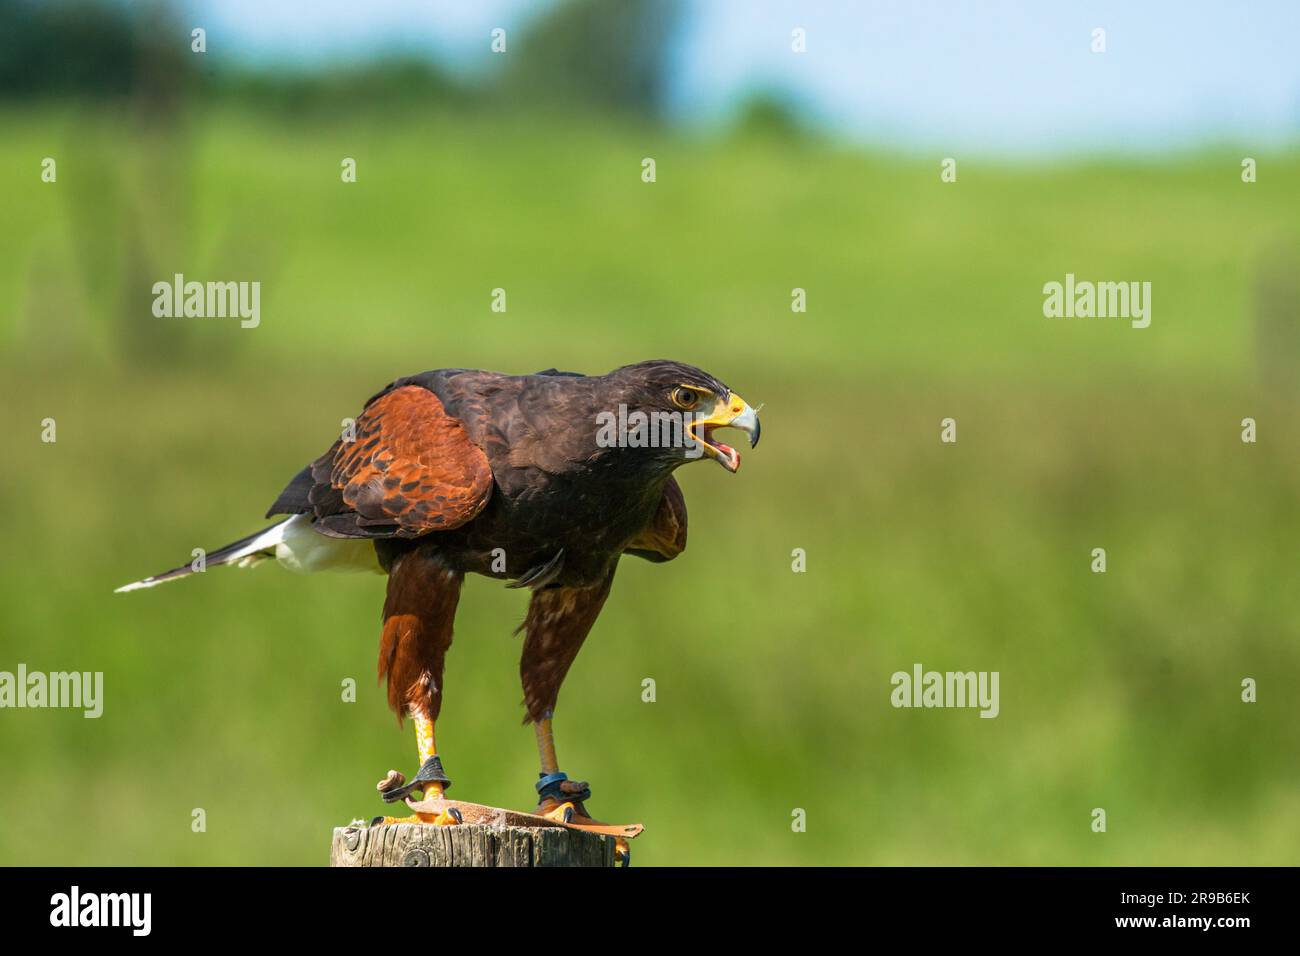 Harris hawk on a wooden pole in green nature Stock Photo